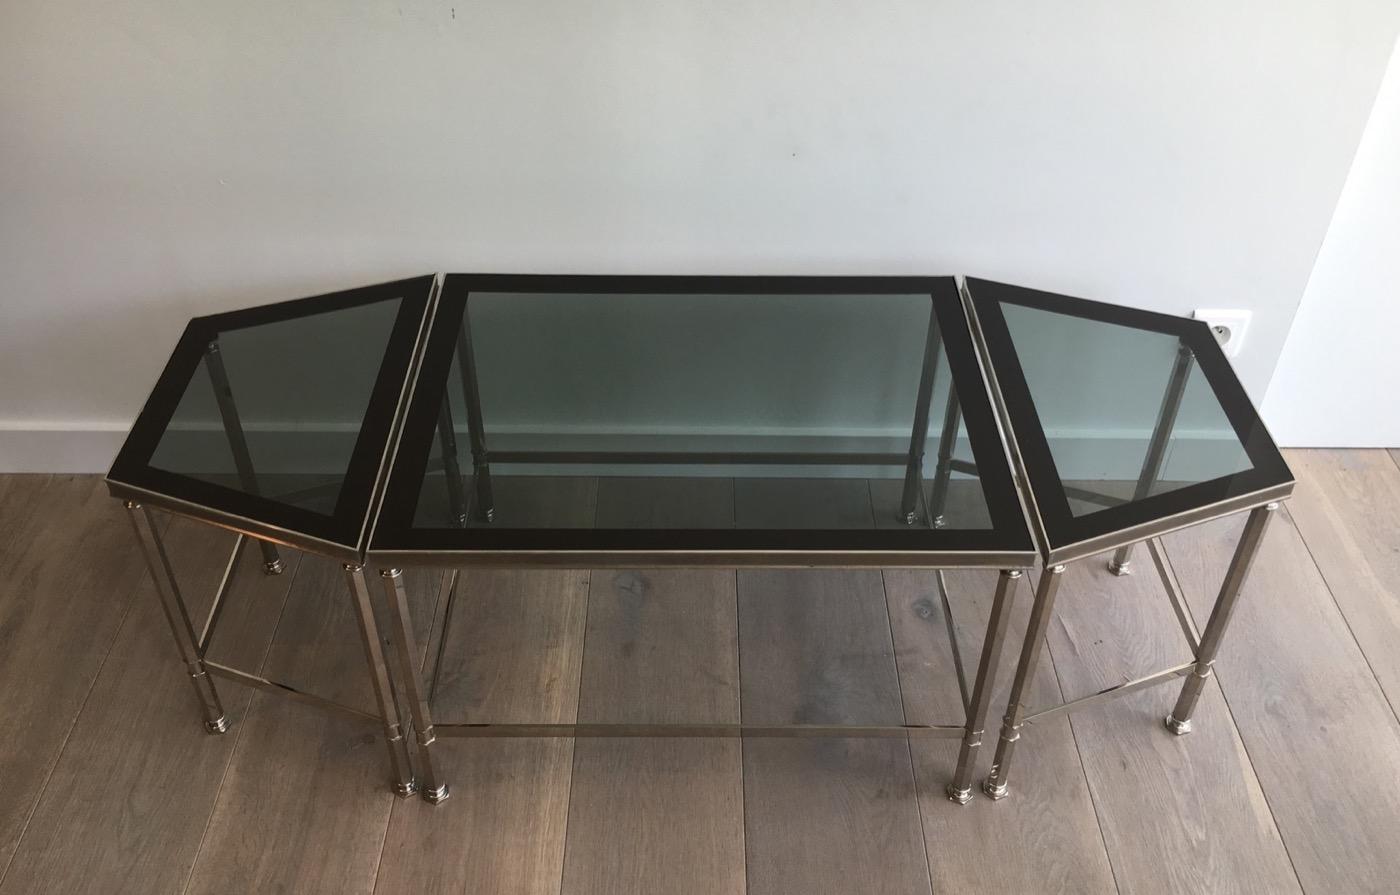 Rare Nickeled Tripartite Coffee Table with Glass Tops Lacquered All Around For Sale 5